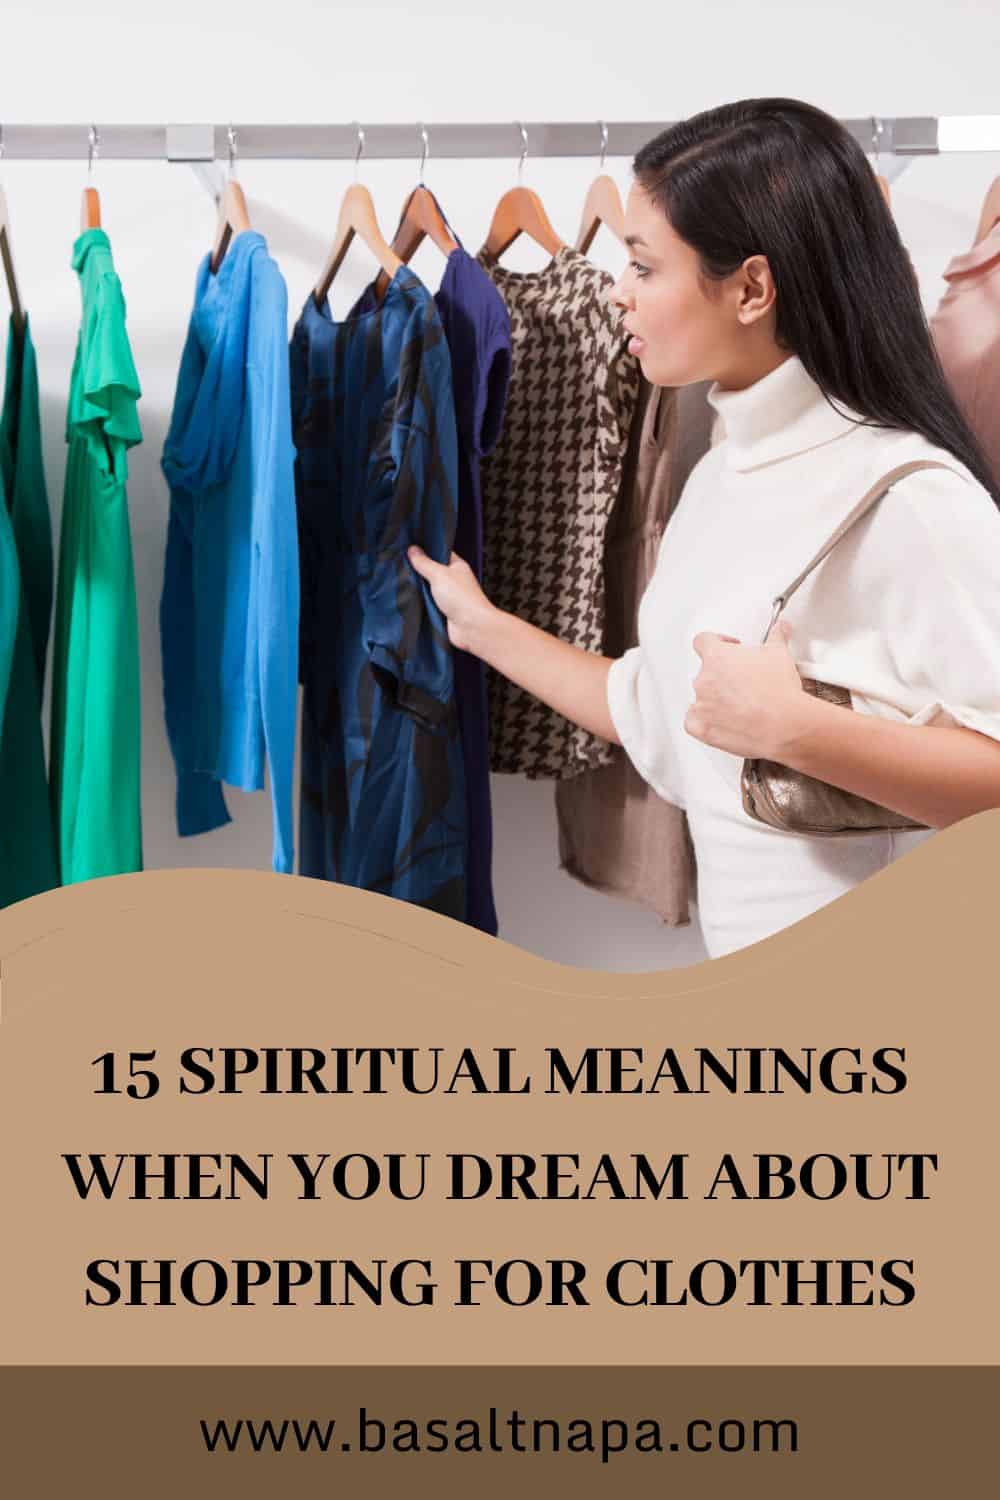 15 Spiritual Meanings When You Dream About Shopping for Clothes